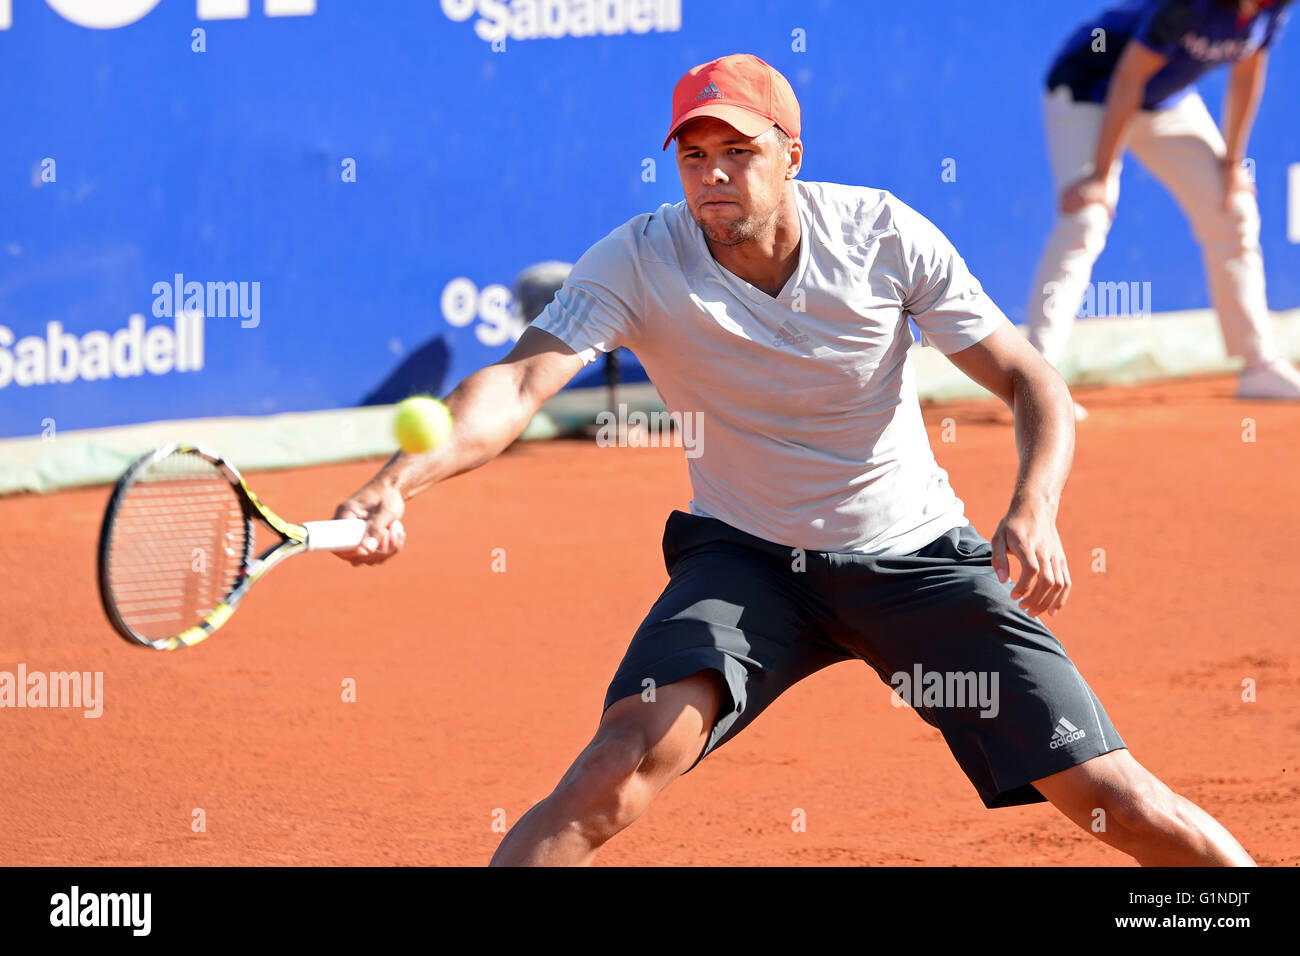 BARCELONA - APR 22: Jo Wilfried Tsonga (French tennis player) plays at the ATP Barcelona Open Banc Sabadell. Stock Photo